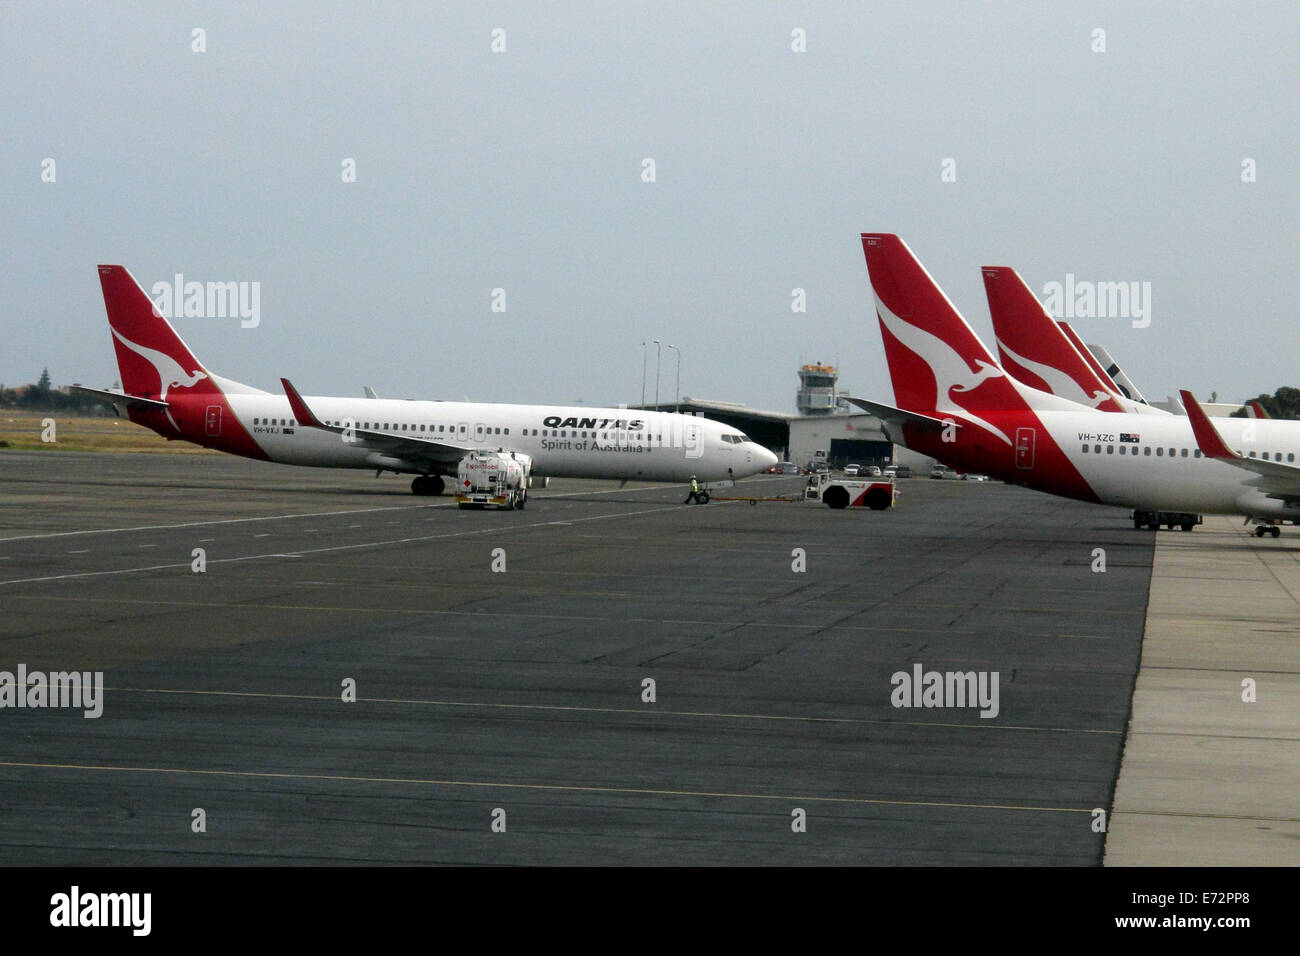 Qantas plane being pushed back ready for take off while other planes wait to take on passengers. Adelaide Airport Australia. Stock Photo